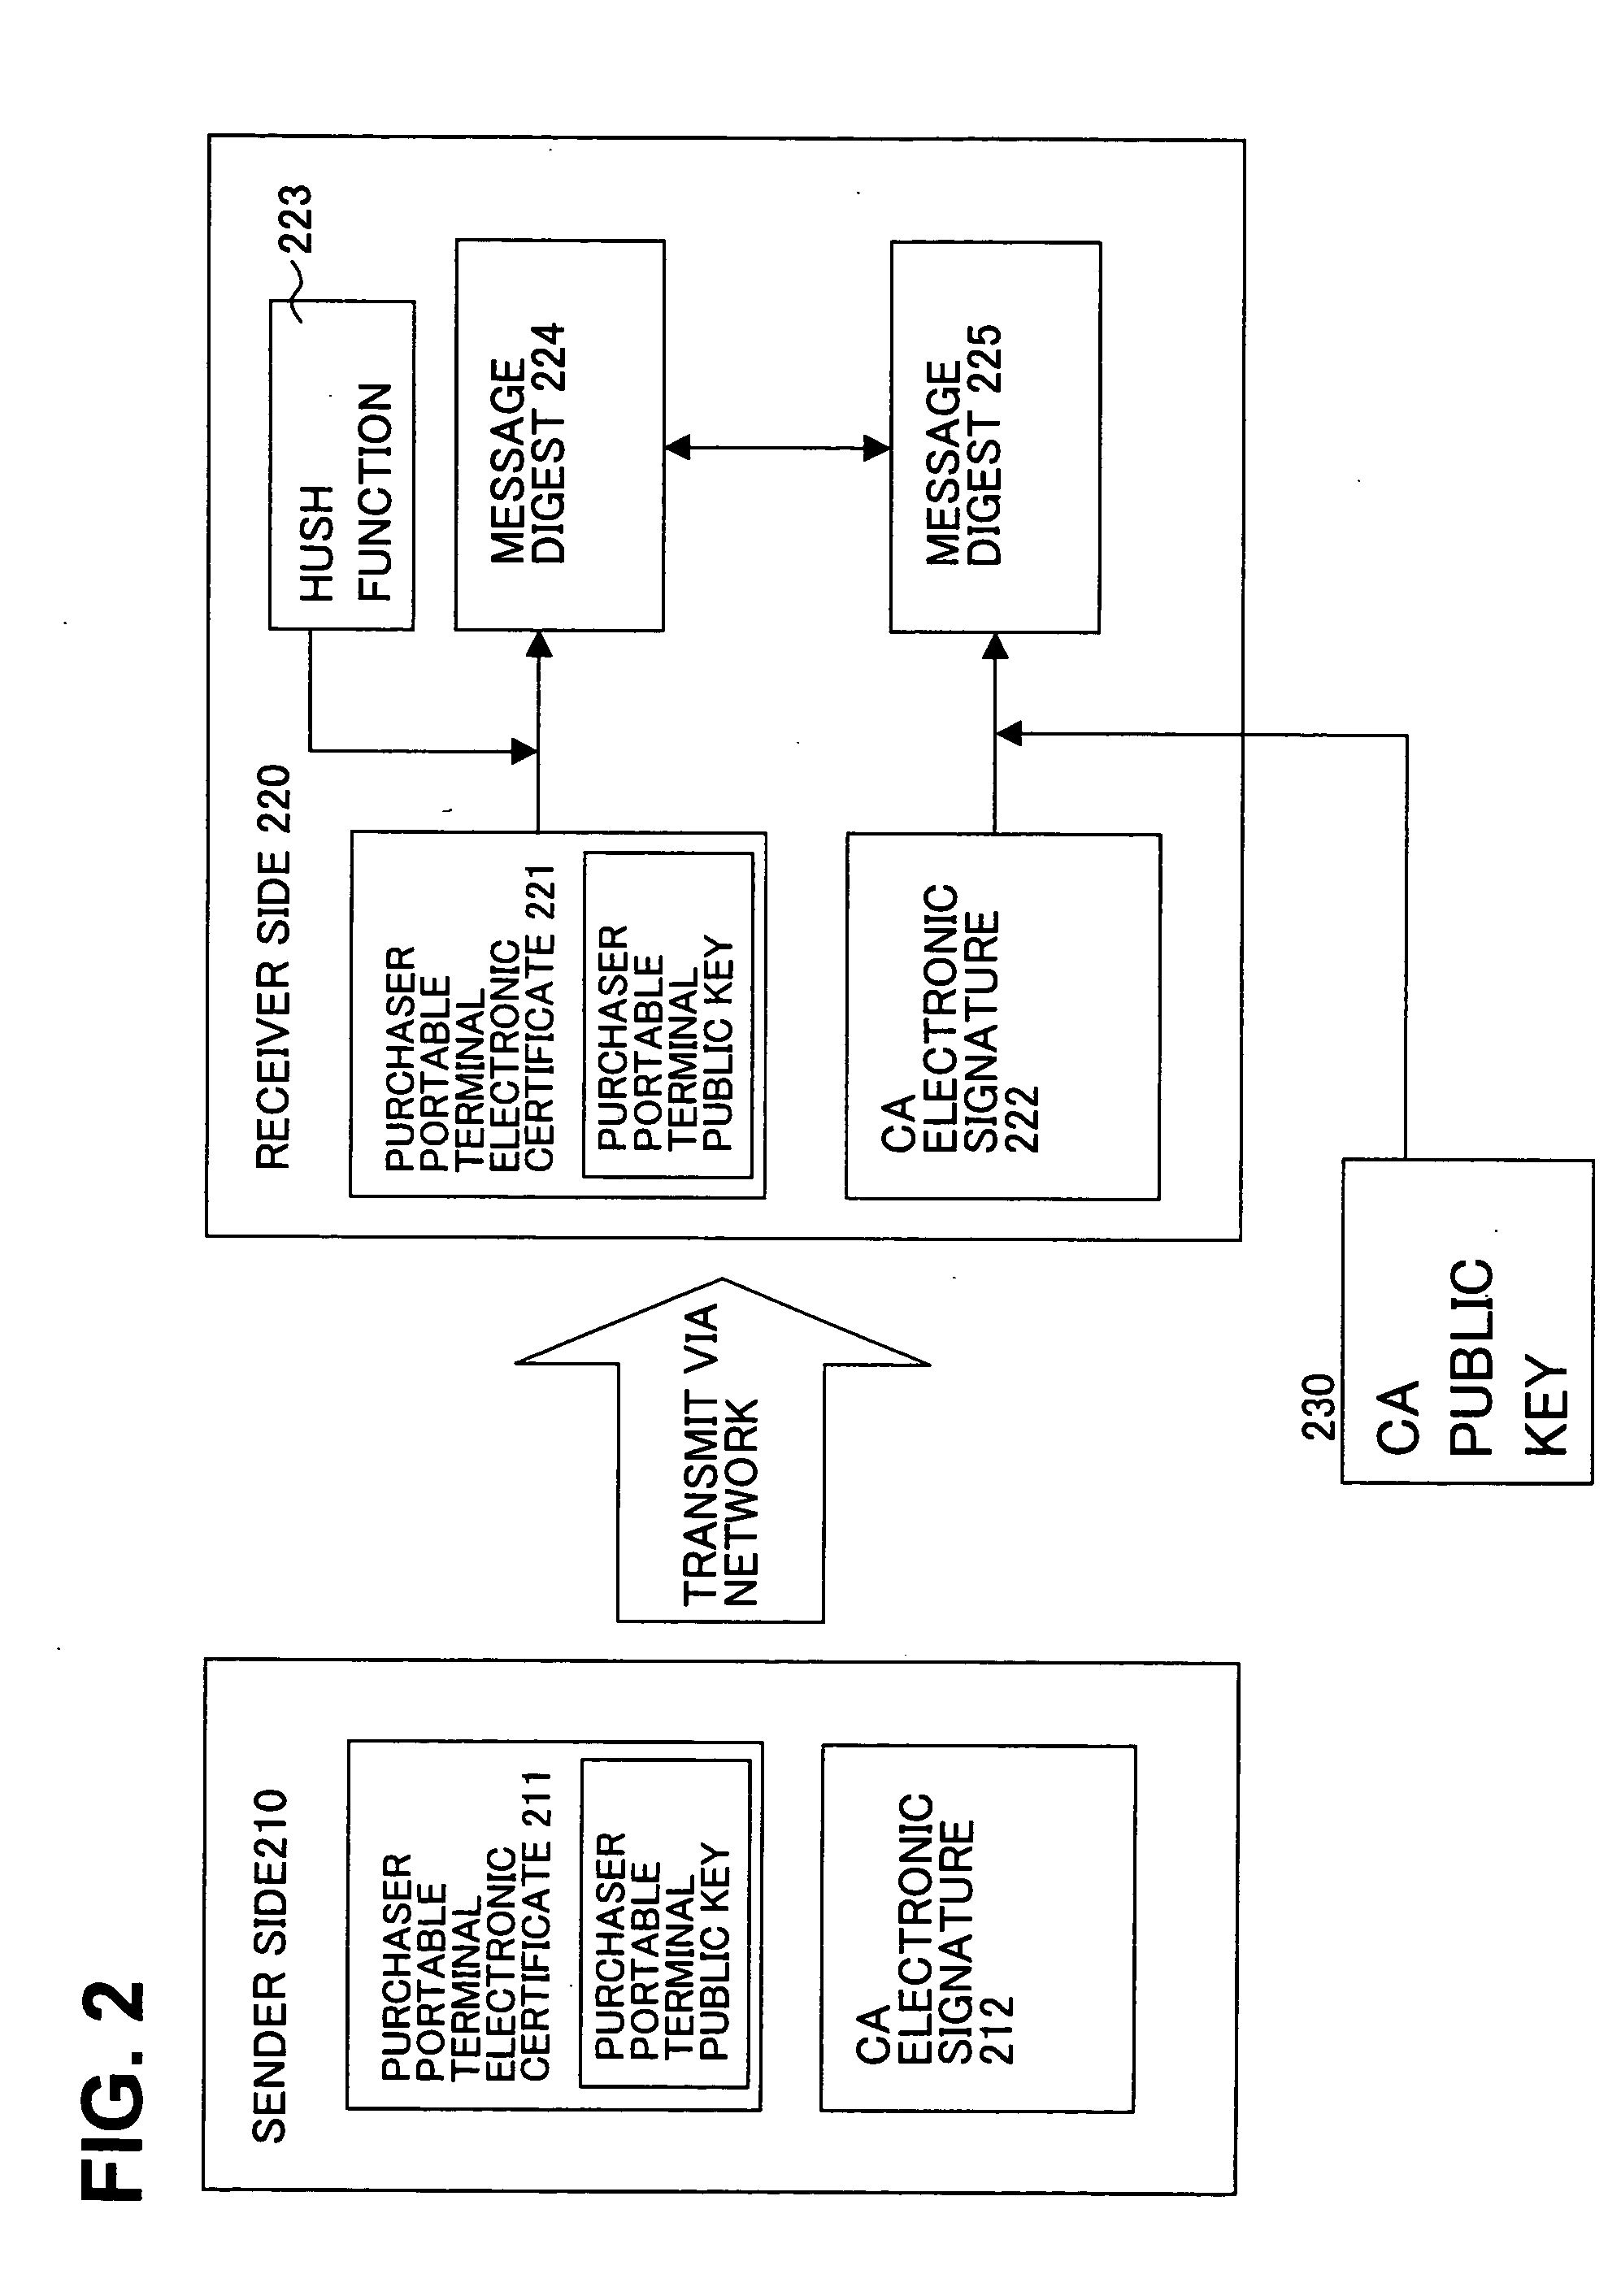 Data communication intermediation program and apparatus for promoting authentication processing in cooperation with purchaser portable terminal having personal identification information and communication function